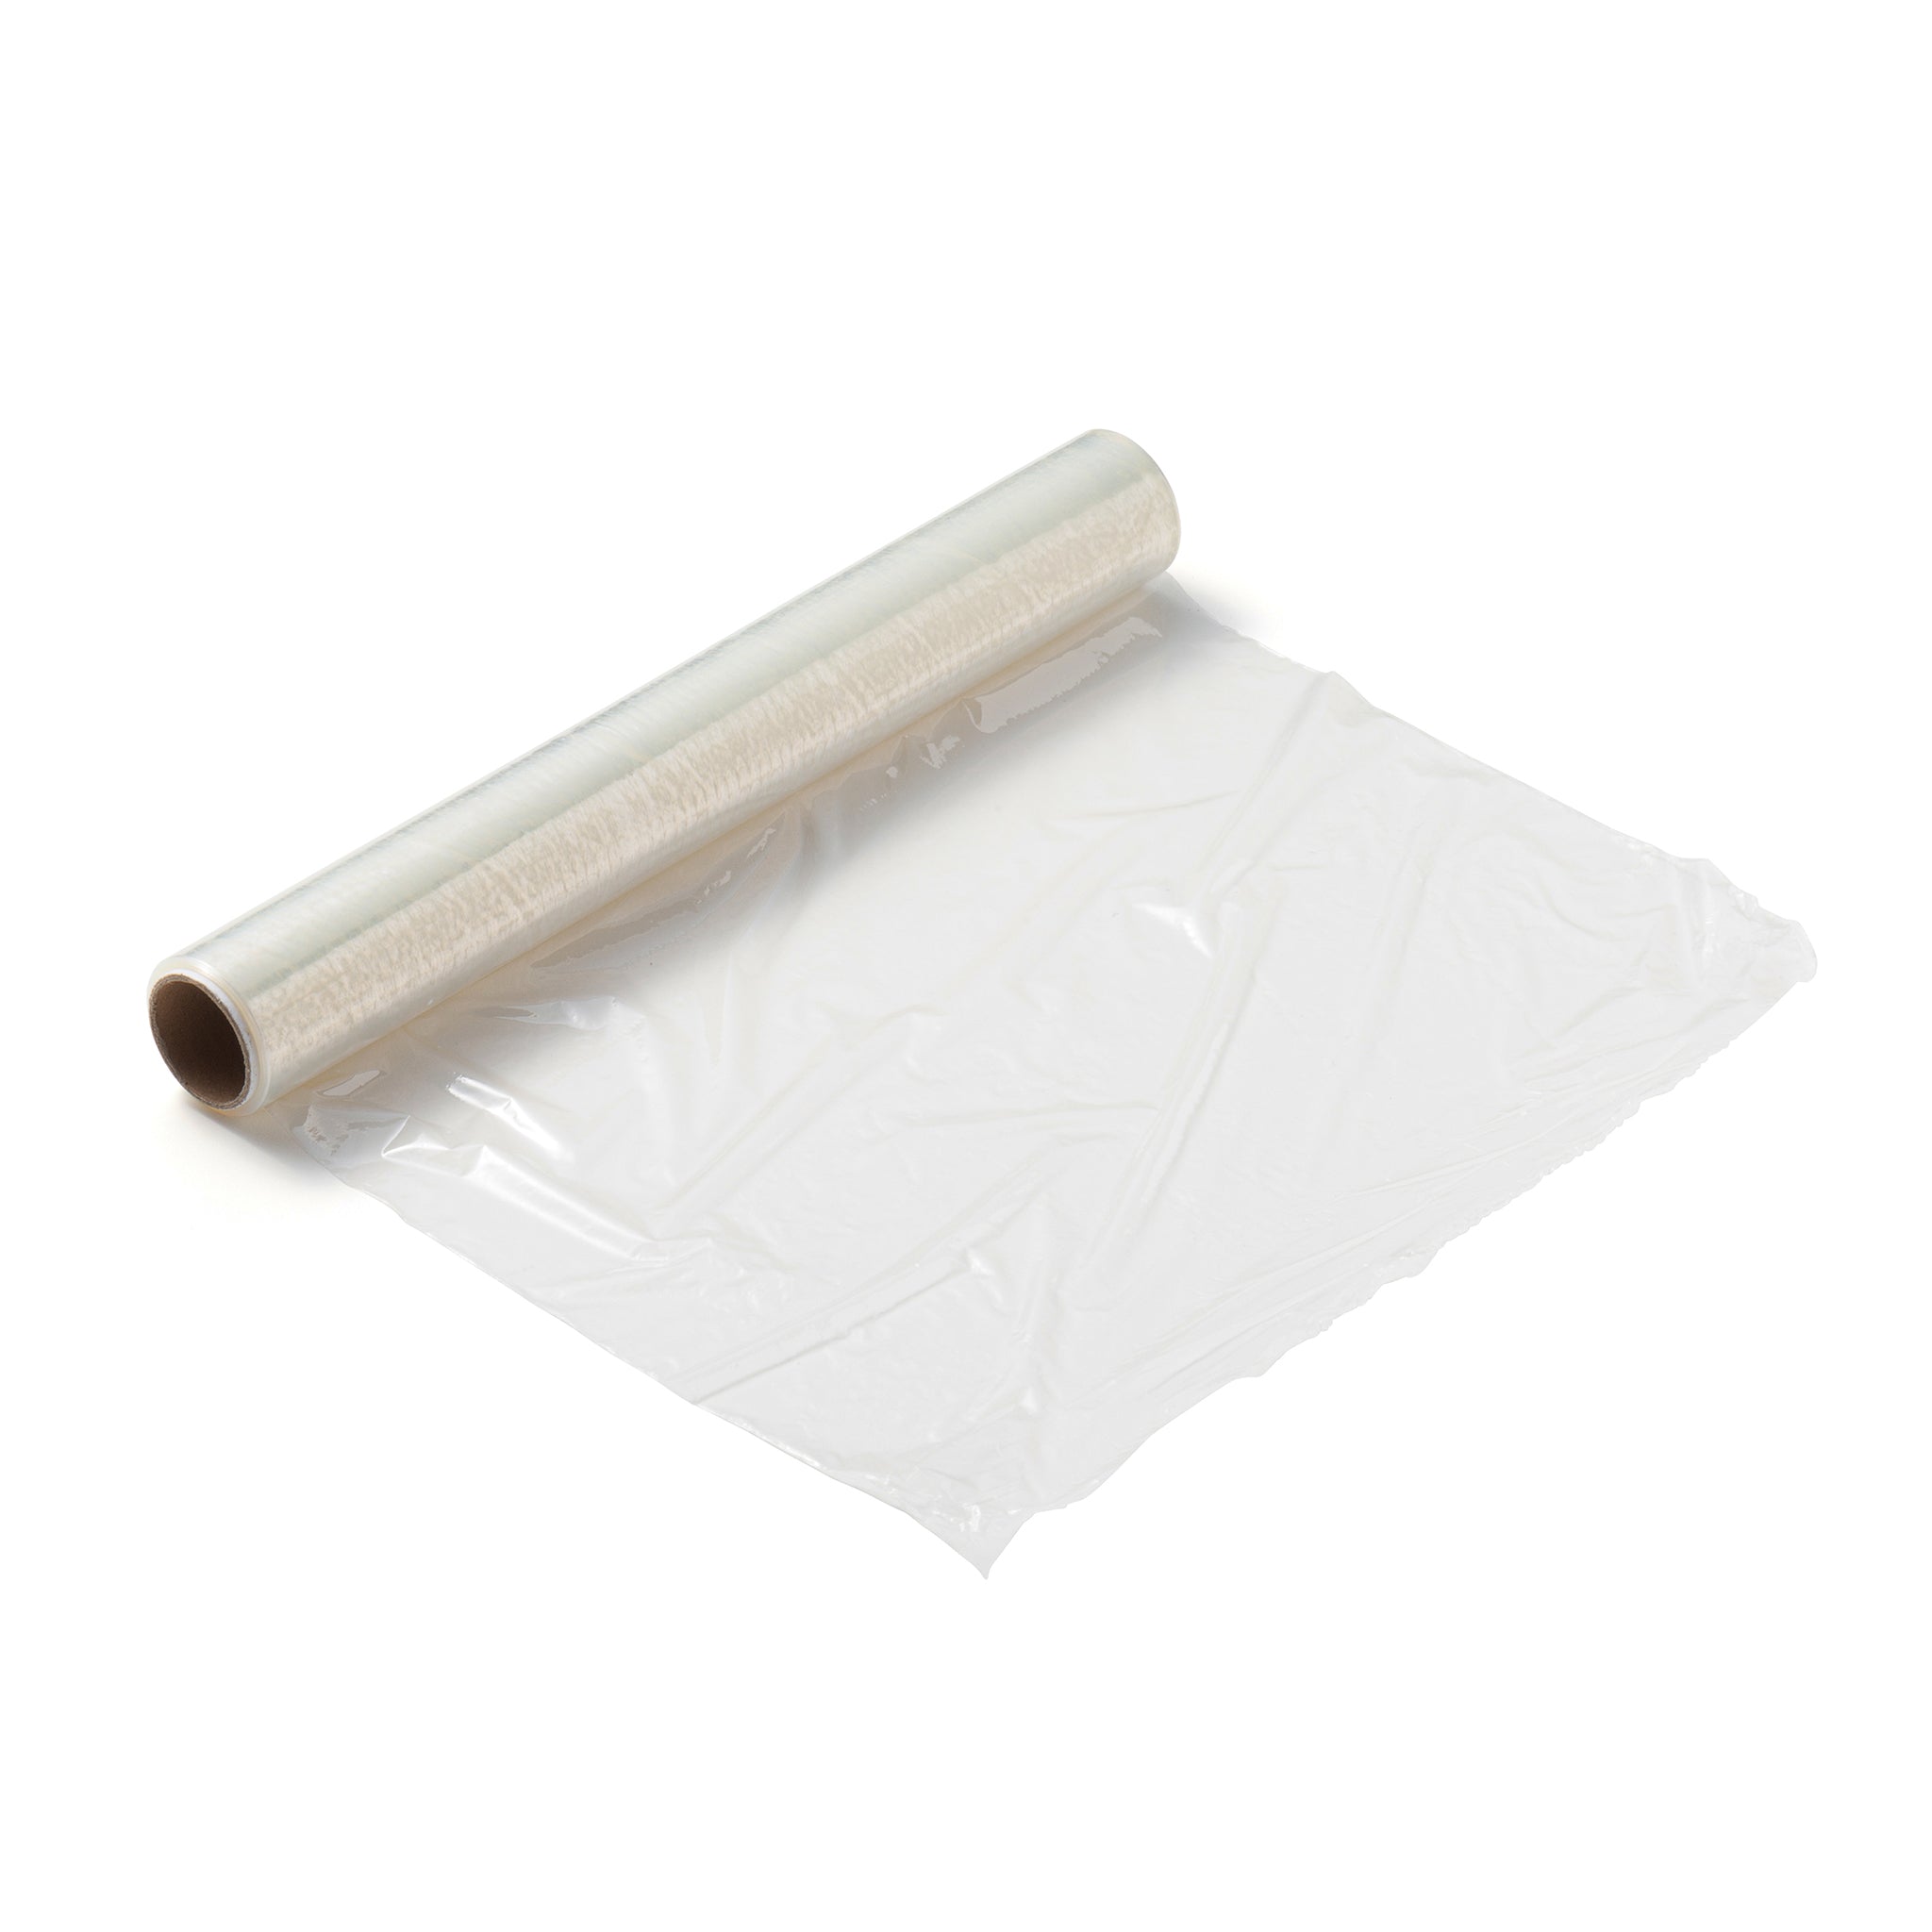 Compostic Food Wrap Cling - Case of 12 - 250 ft